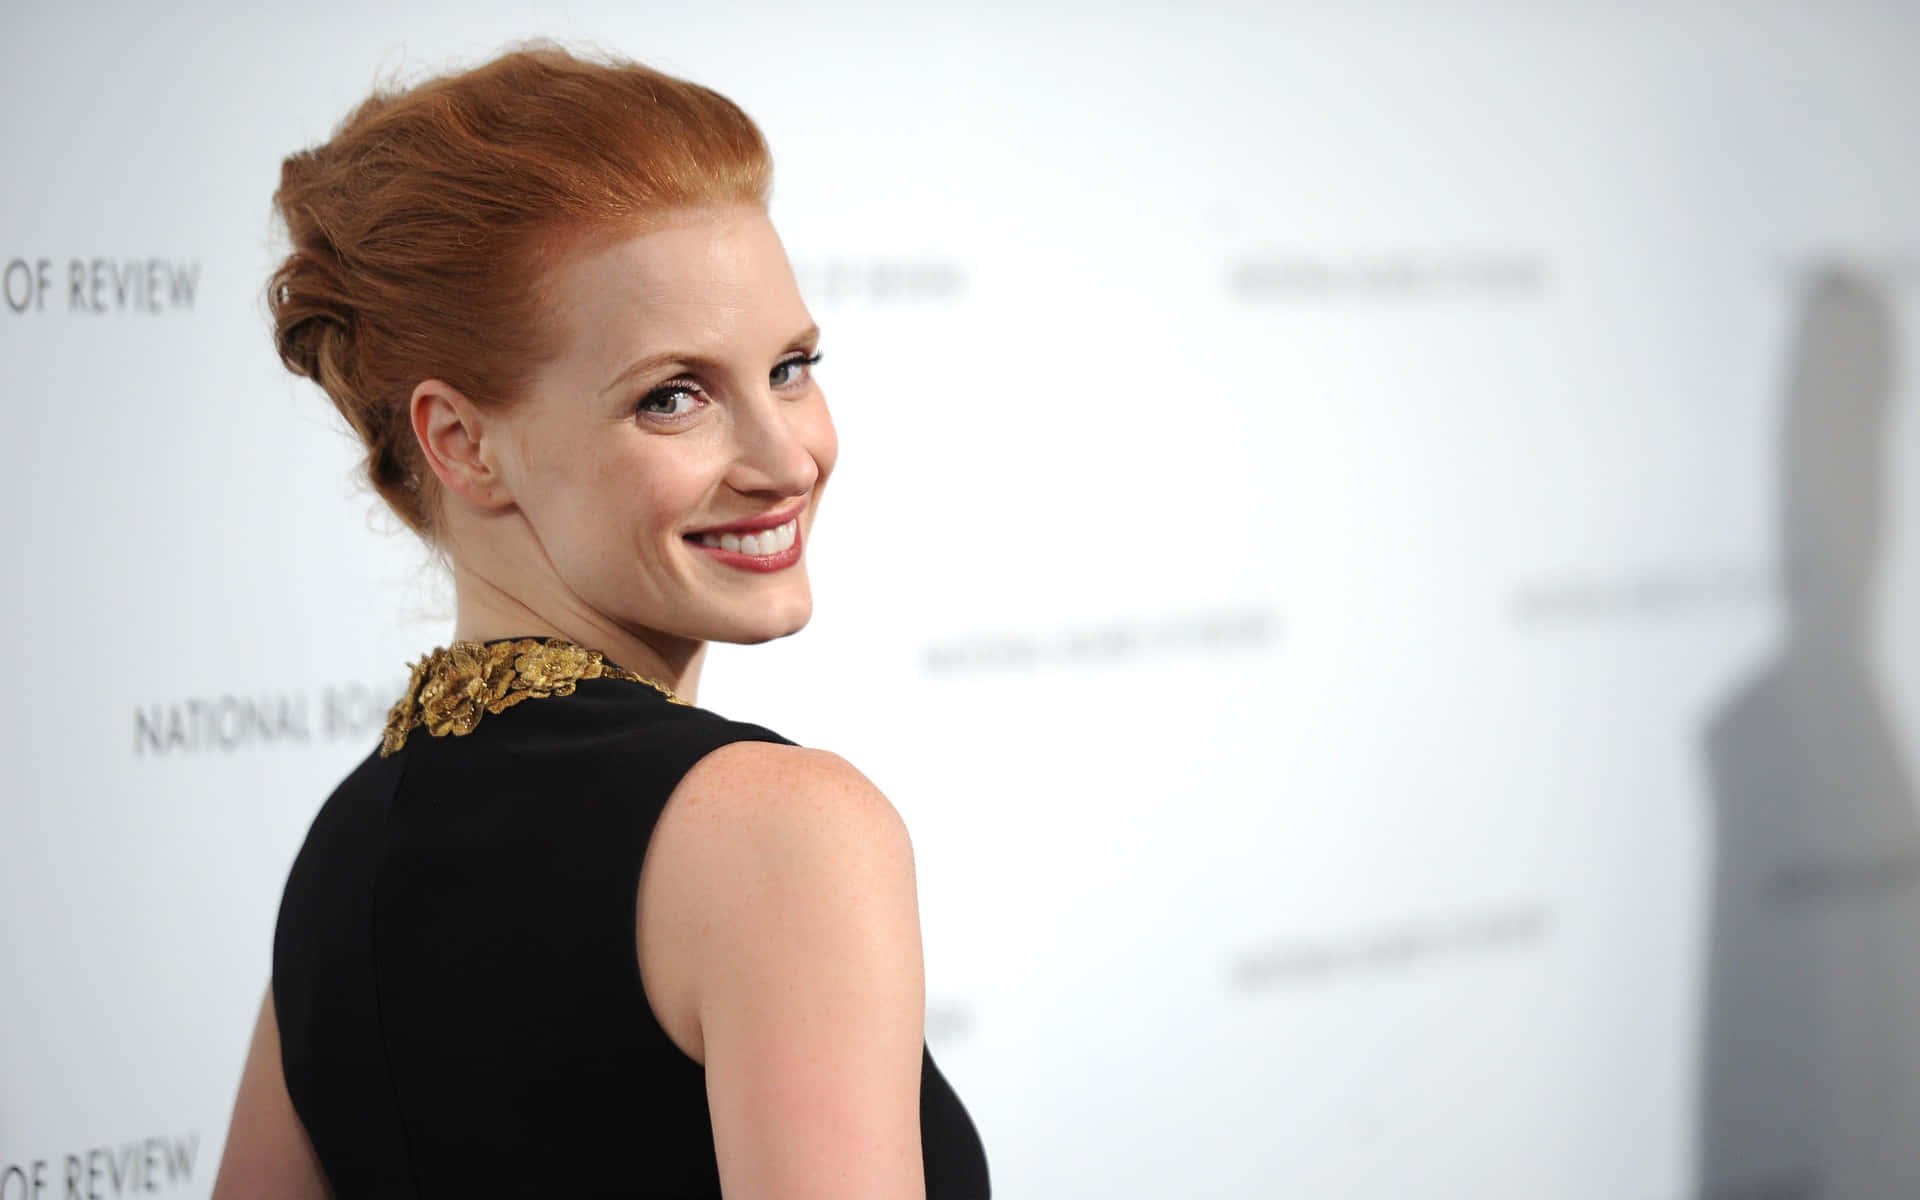 Jessica Chastain posing in a stylish outfit Wallpaper